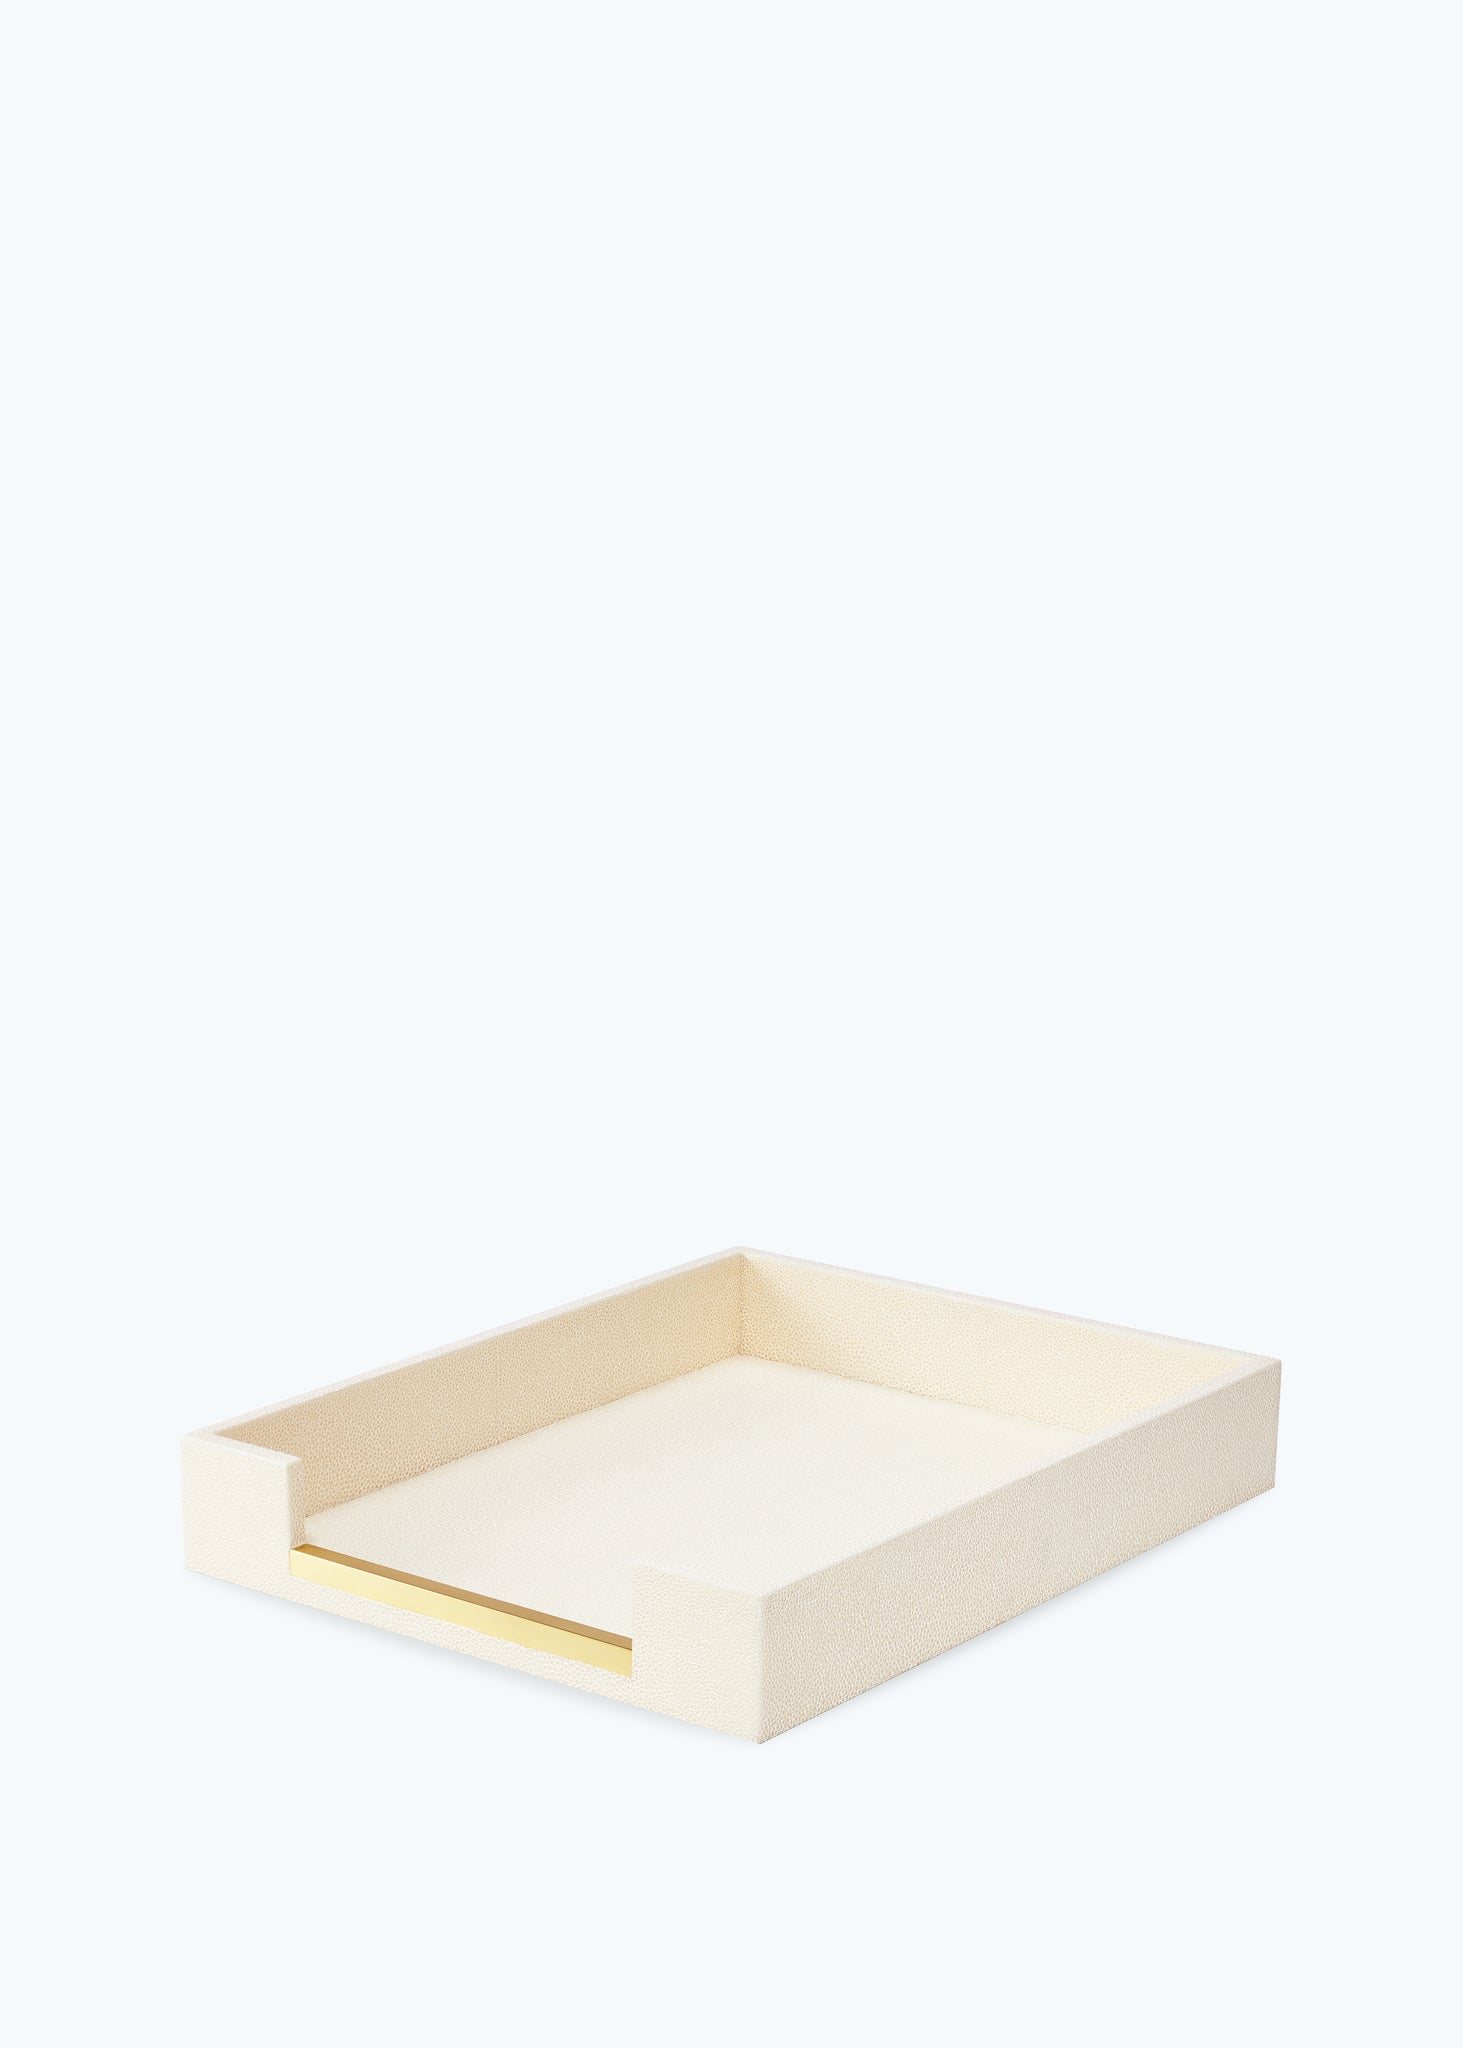 Shargreen Paper Tray in Cream